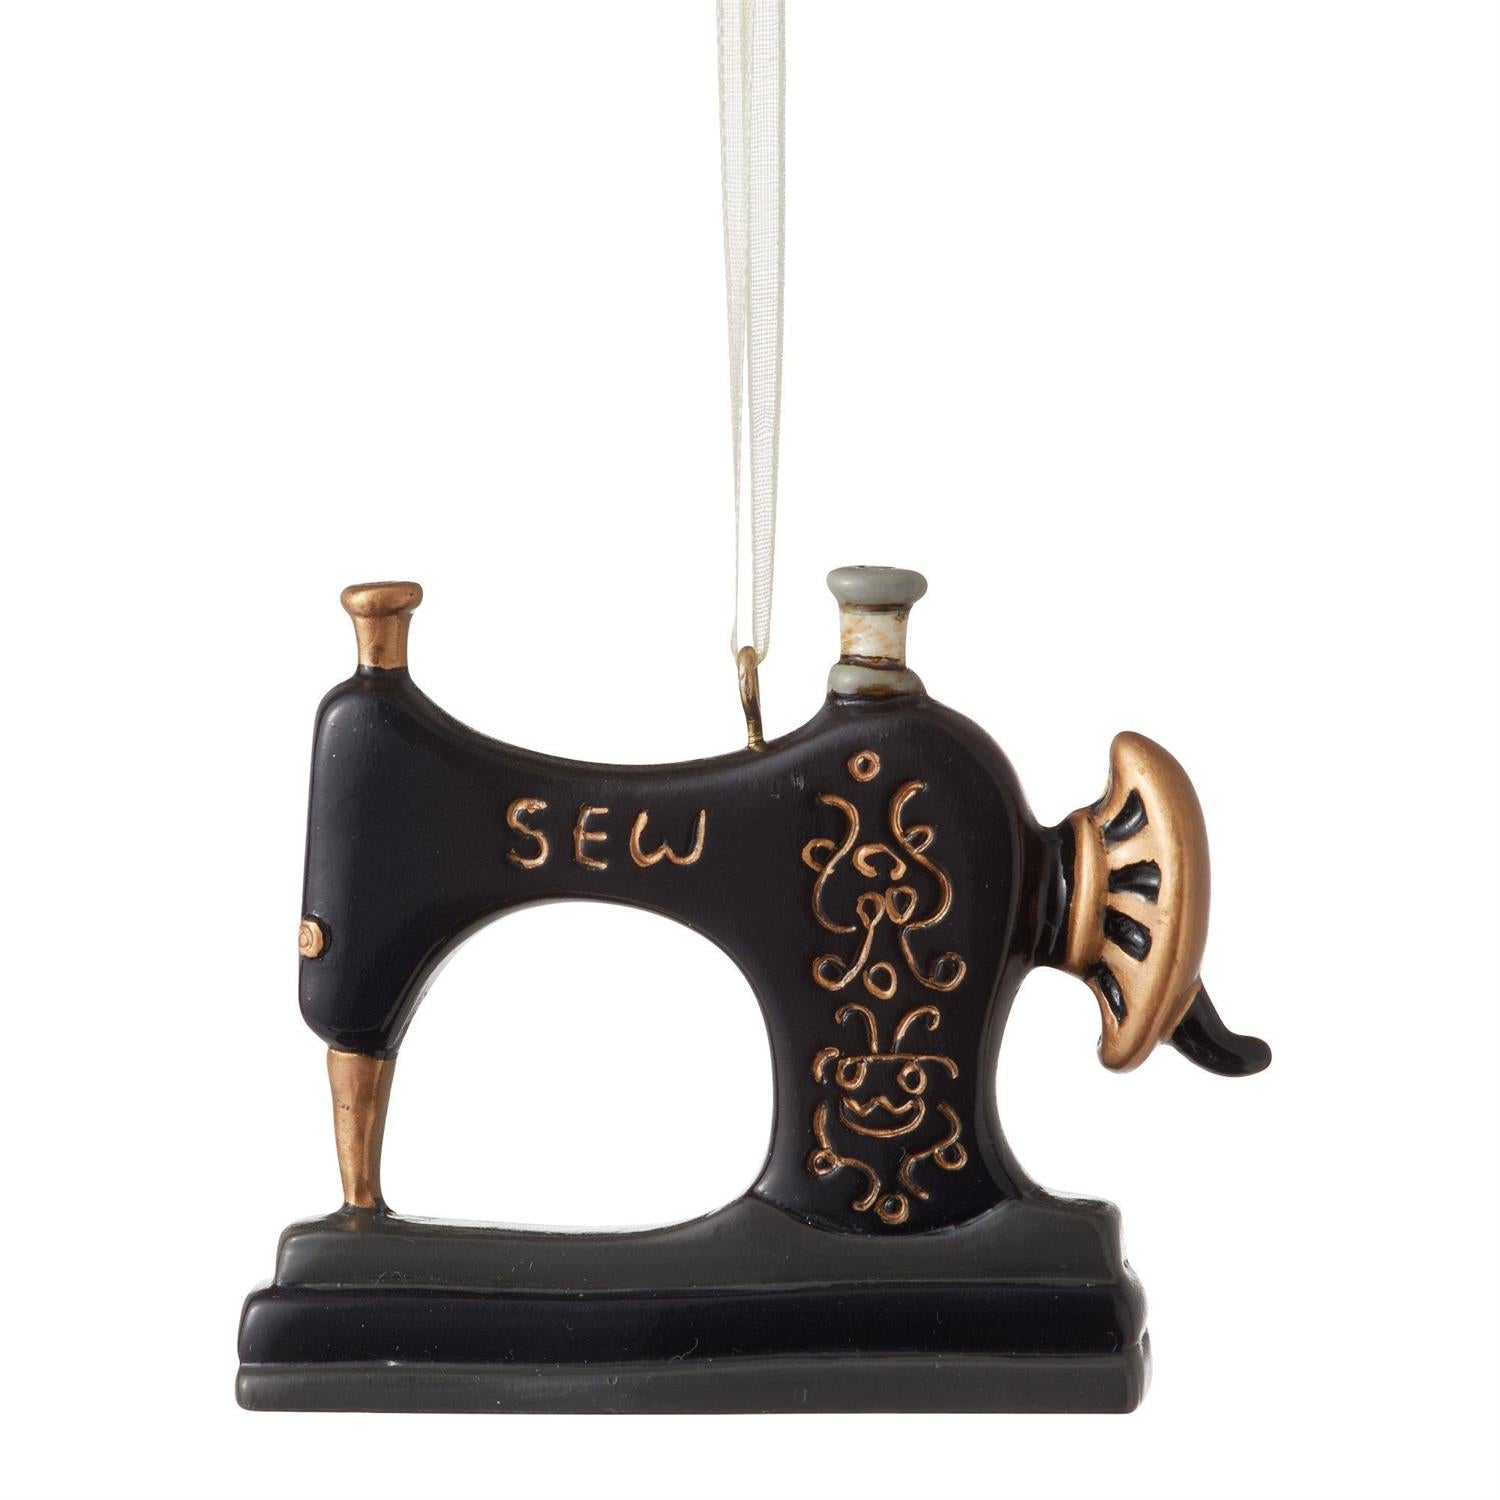 Vintage sewing machine ornament gift for quilters and seamstresses